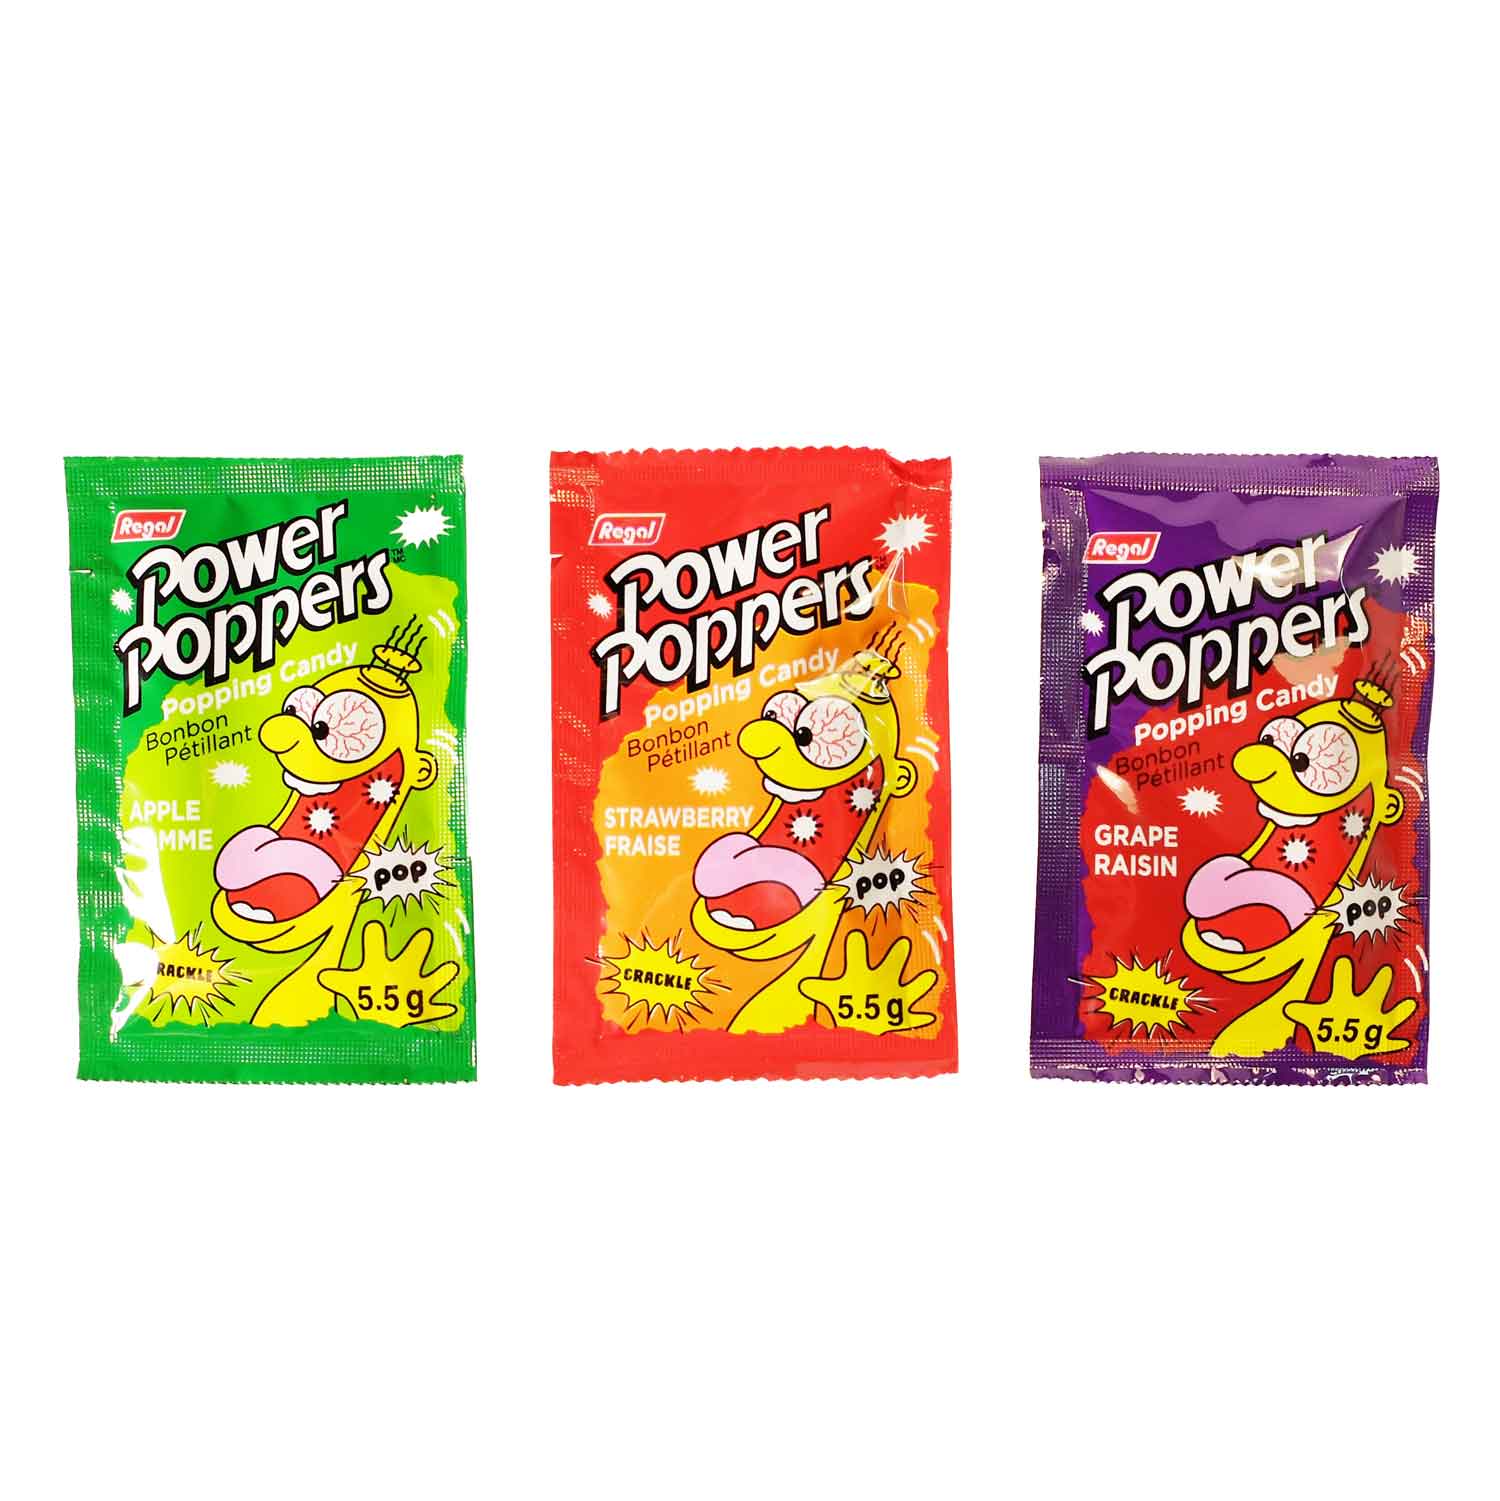 Power Poppers exploding candies